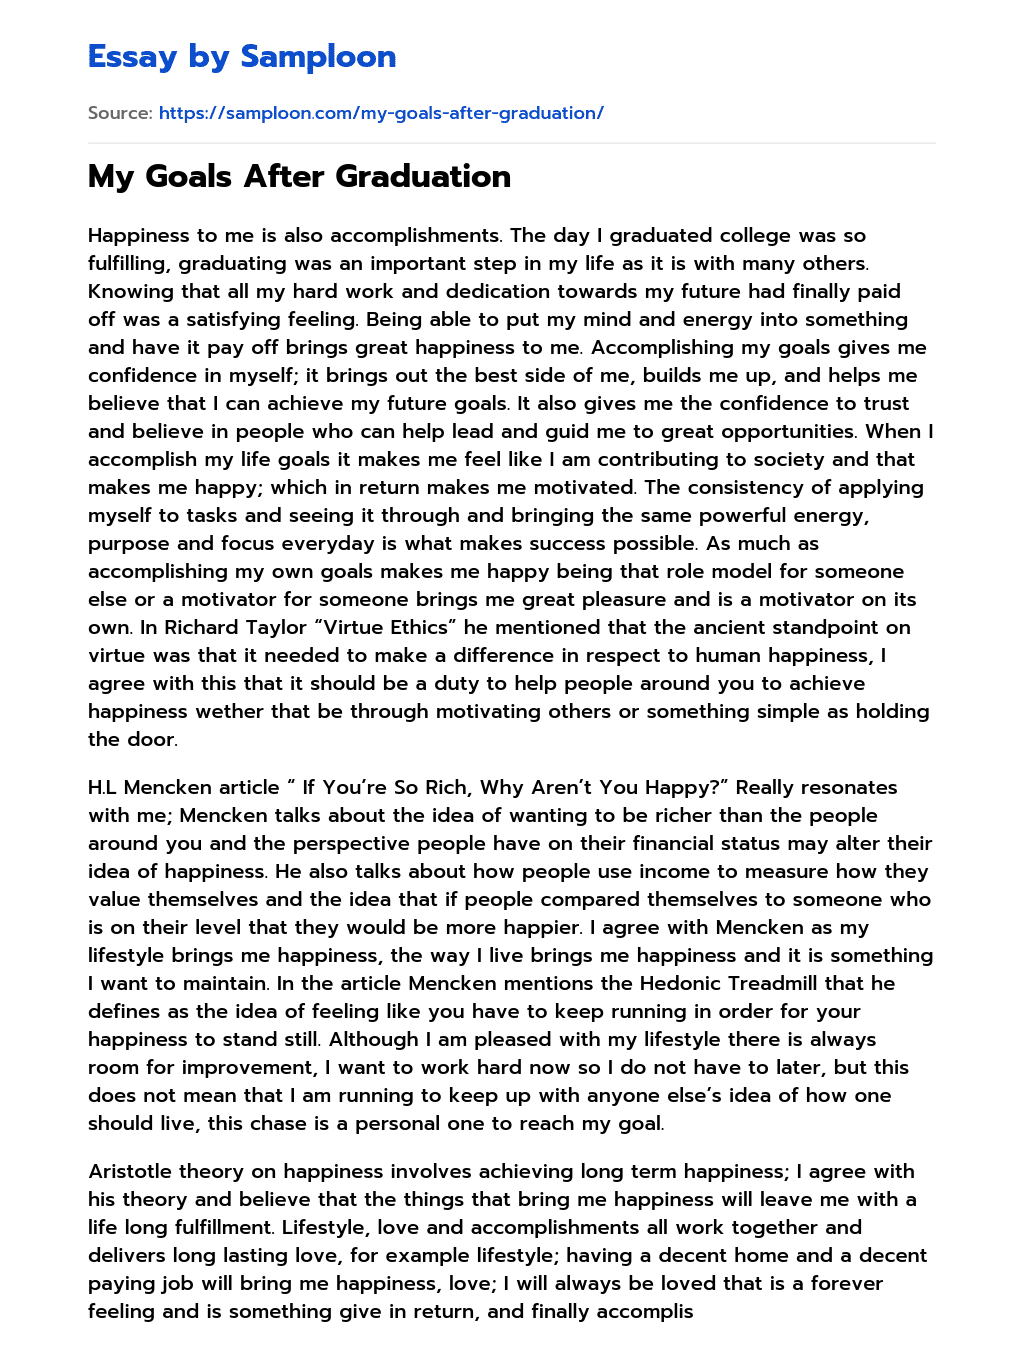 what are your goals after graduation essay